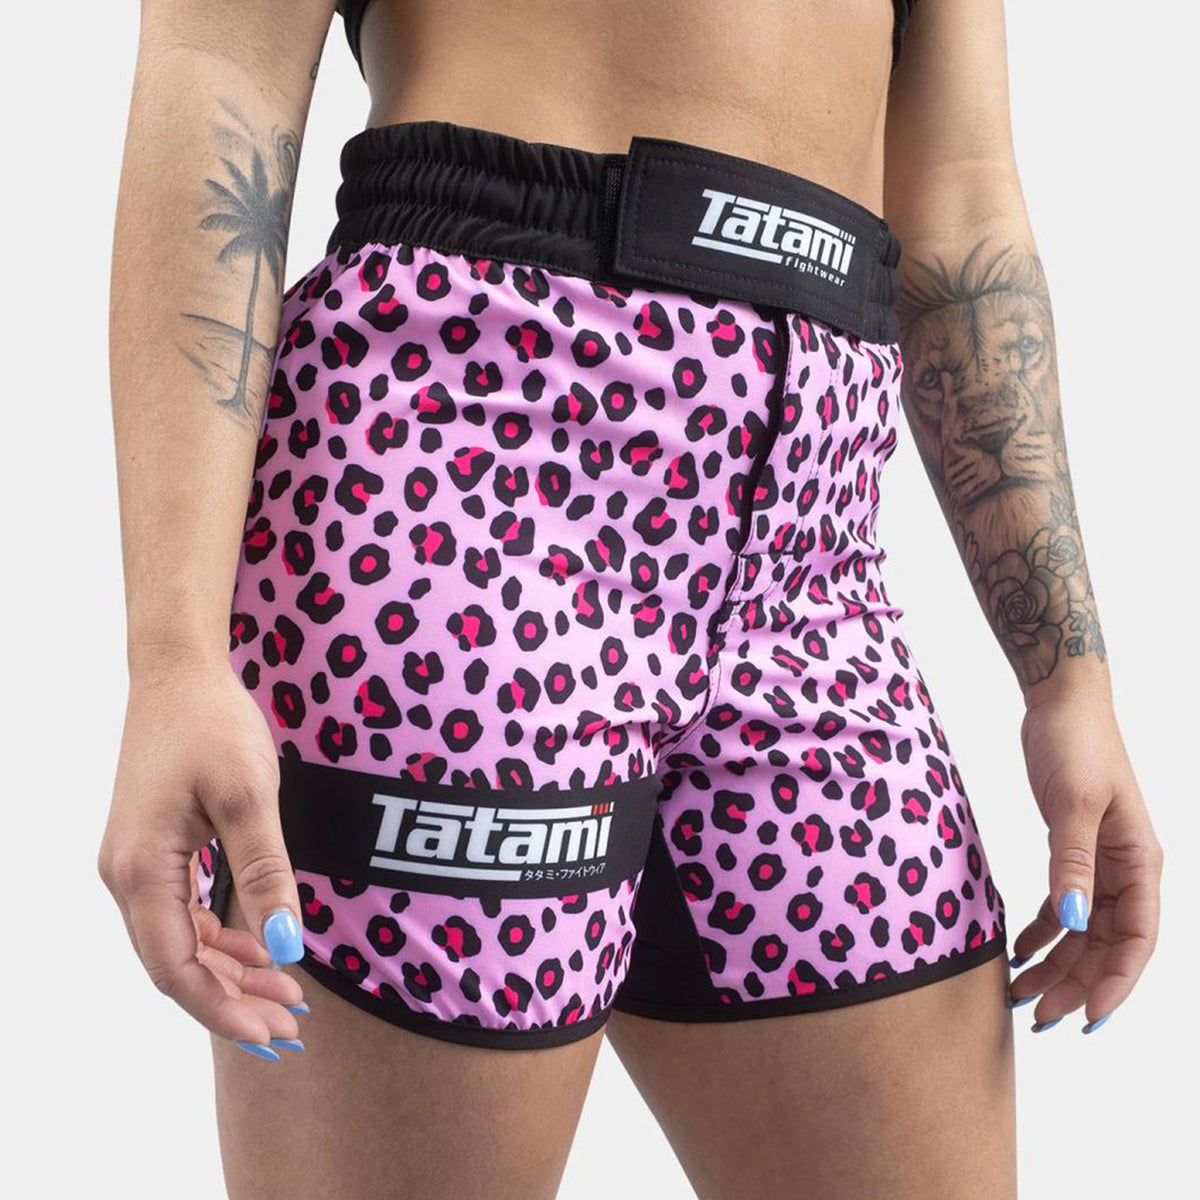 Tatami "Recharge" Women's Fight Shorts - Leopard Pink